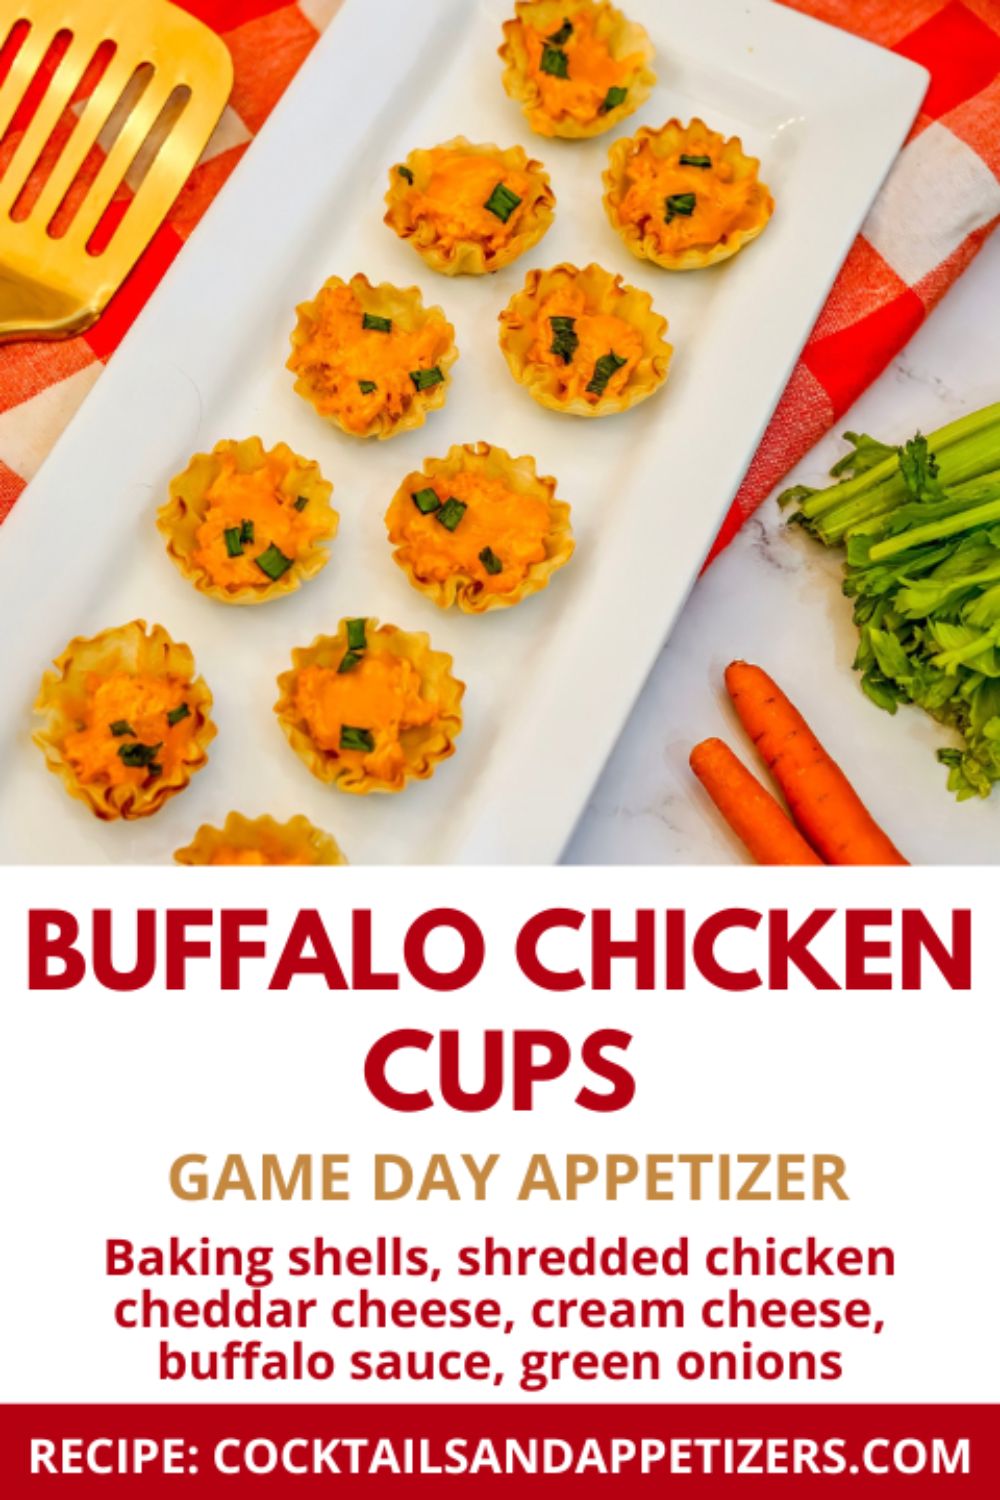 Buffalo Chicken Cups sit on a serving plate.